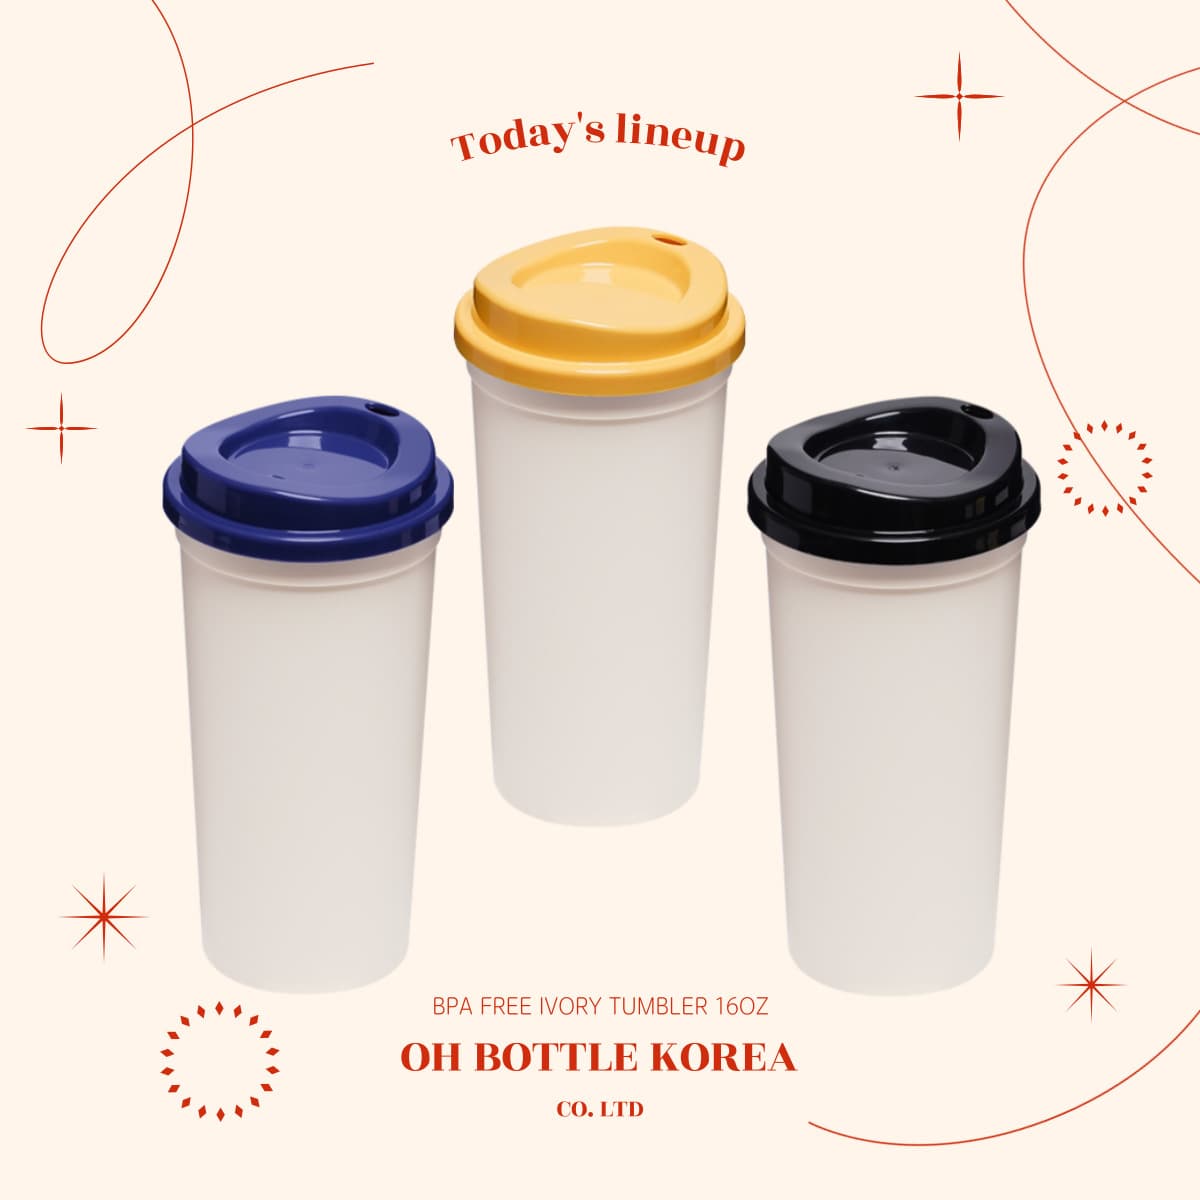 Customized Tumblers with Lid 16oz BPA FREE Reusable Tumblers made in KOREA